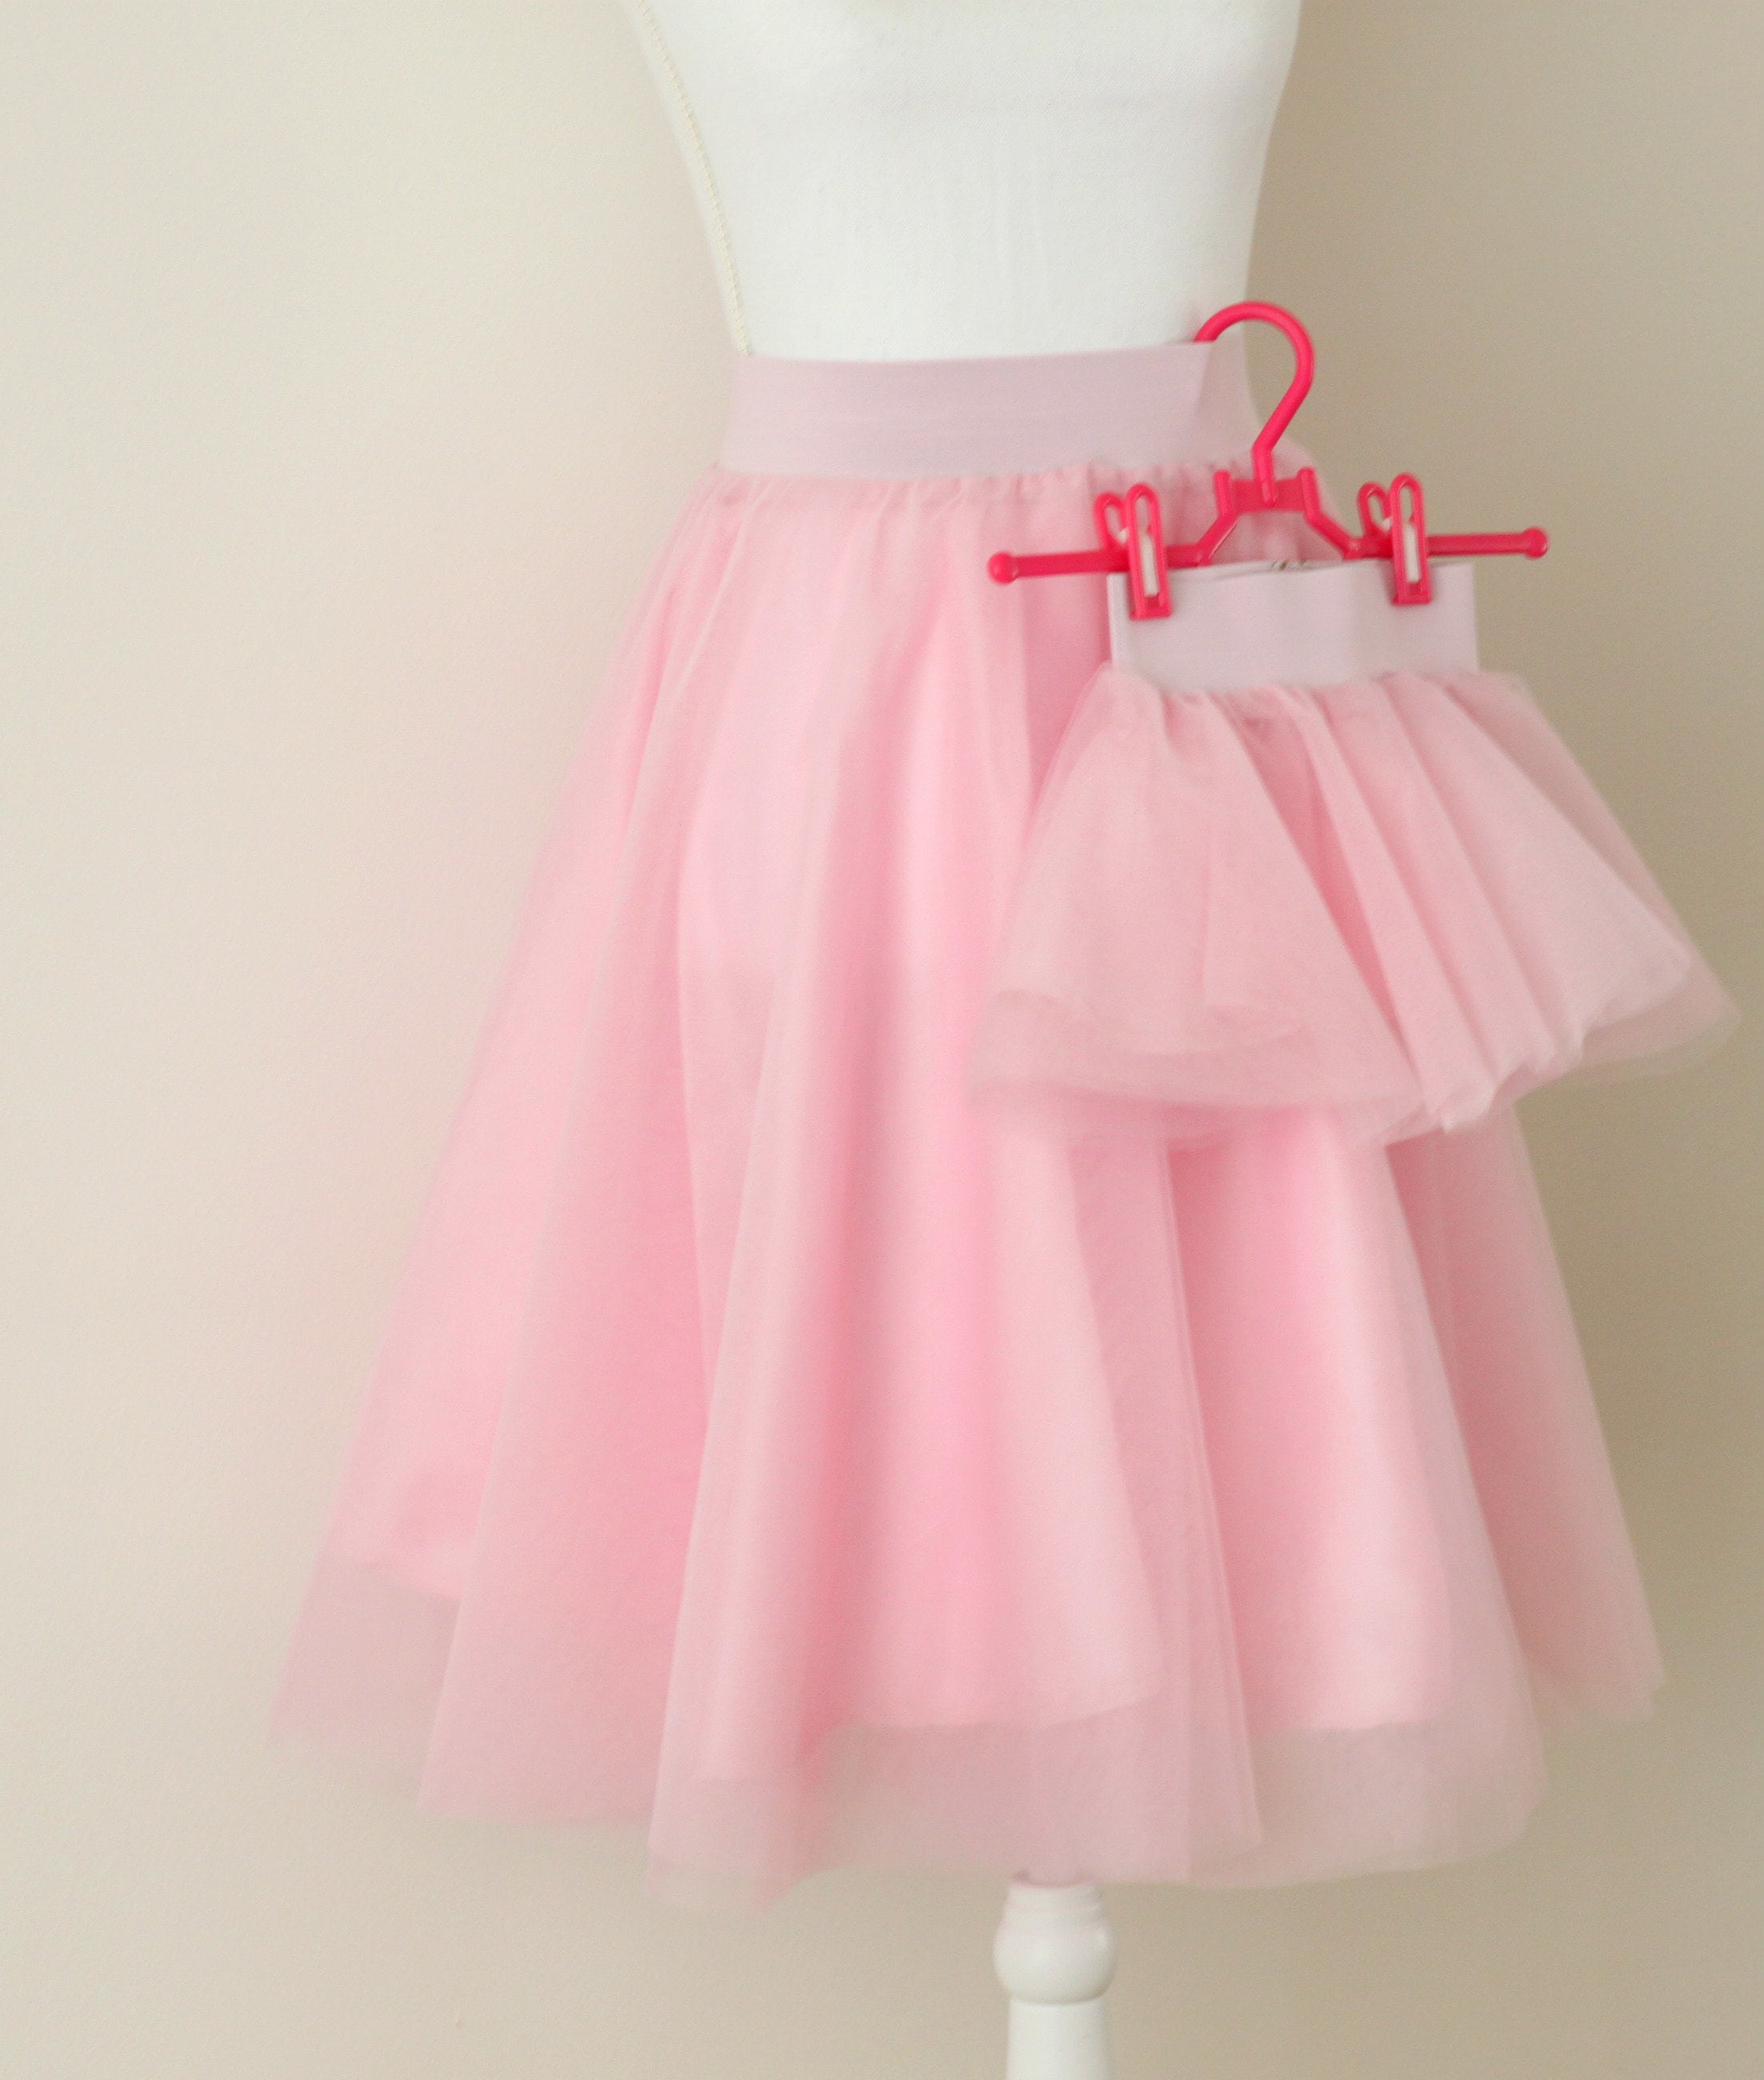 Mommy and Me Light Pink Outfits Matching Pink Skirts Gift - Etsy